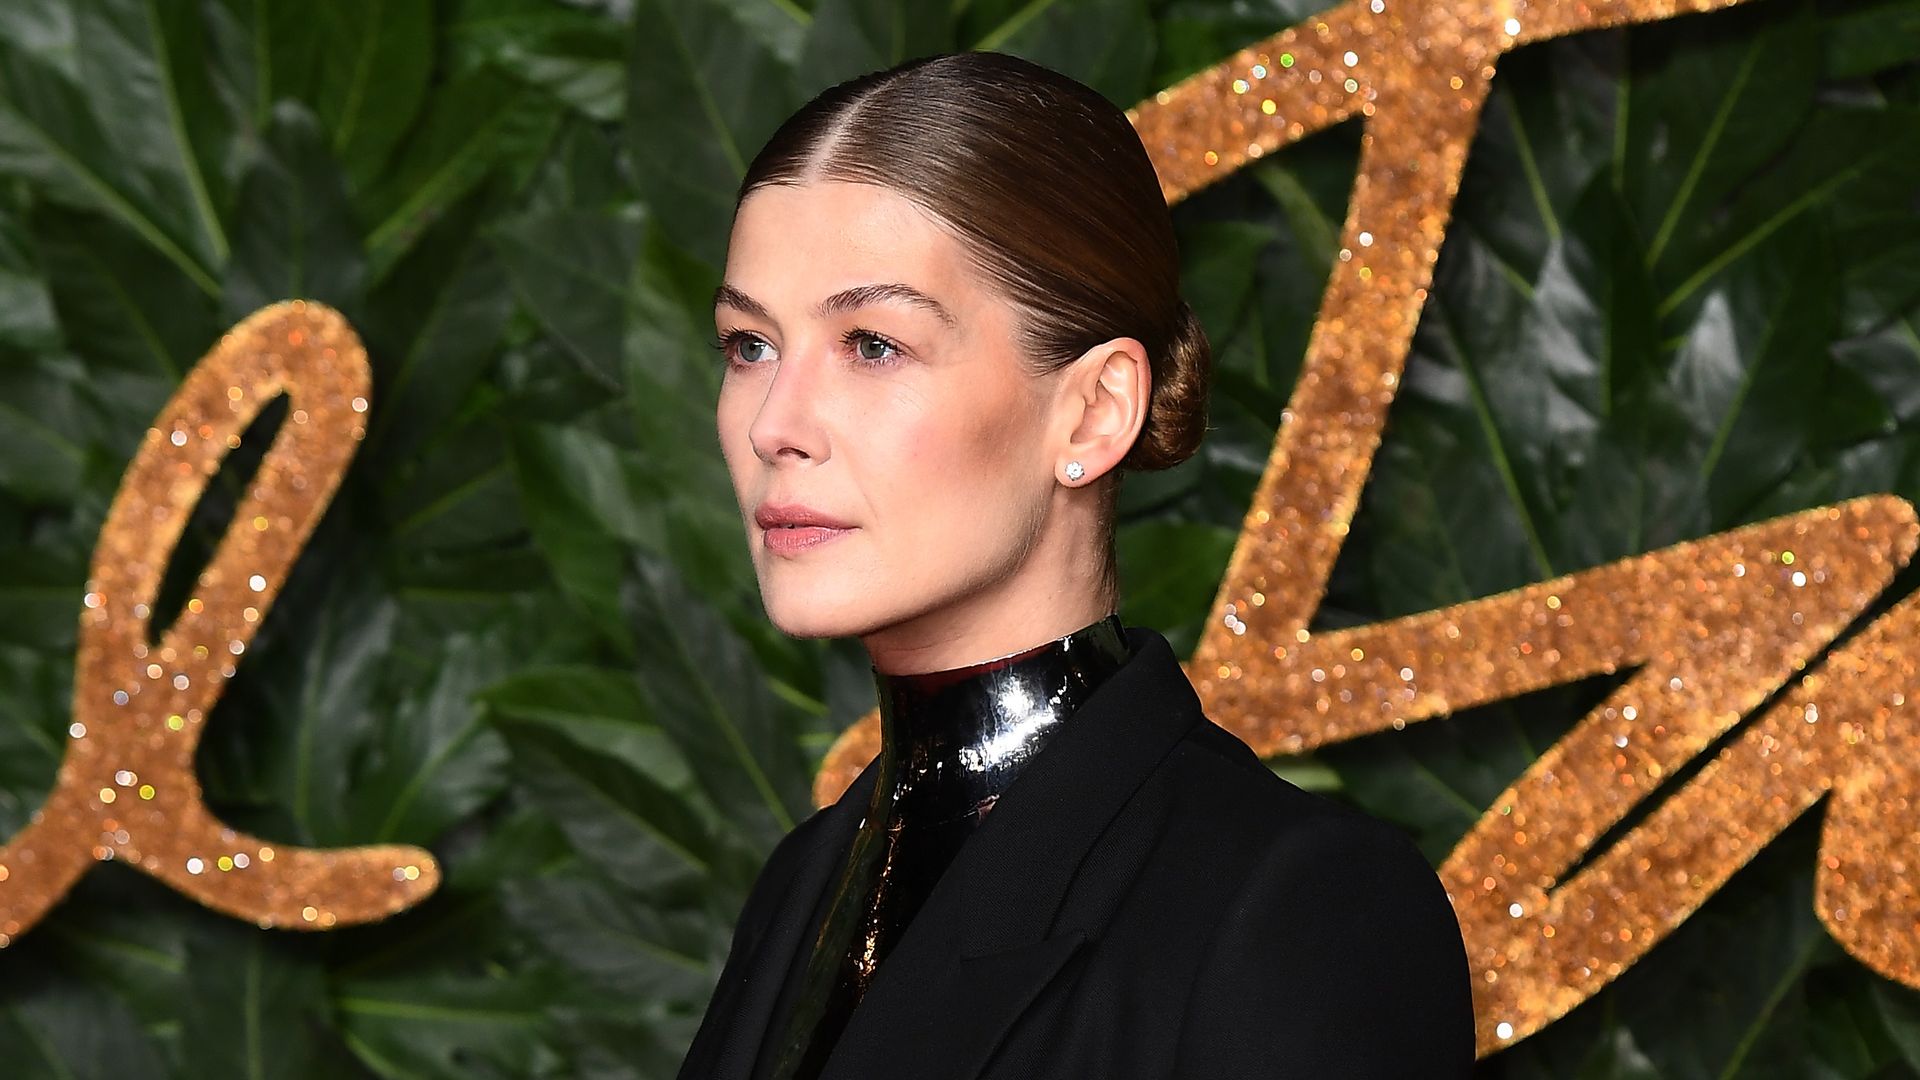 Rosamund Pike arrives at The Fashion Awards 2018 In Partnership With Swarovski at Royal Albert Hall on December 10, 2018 in London, England